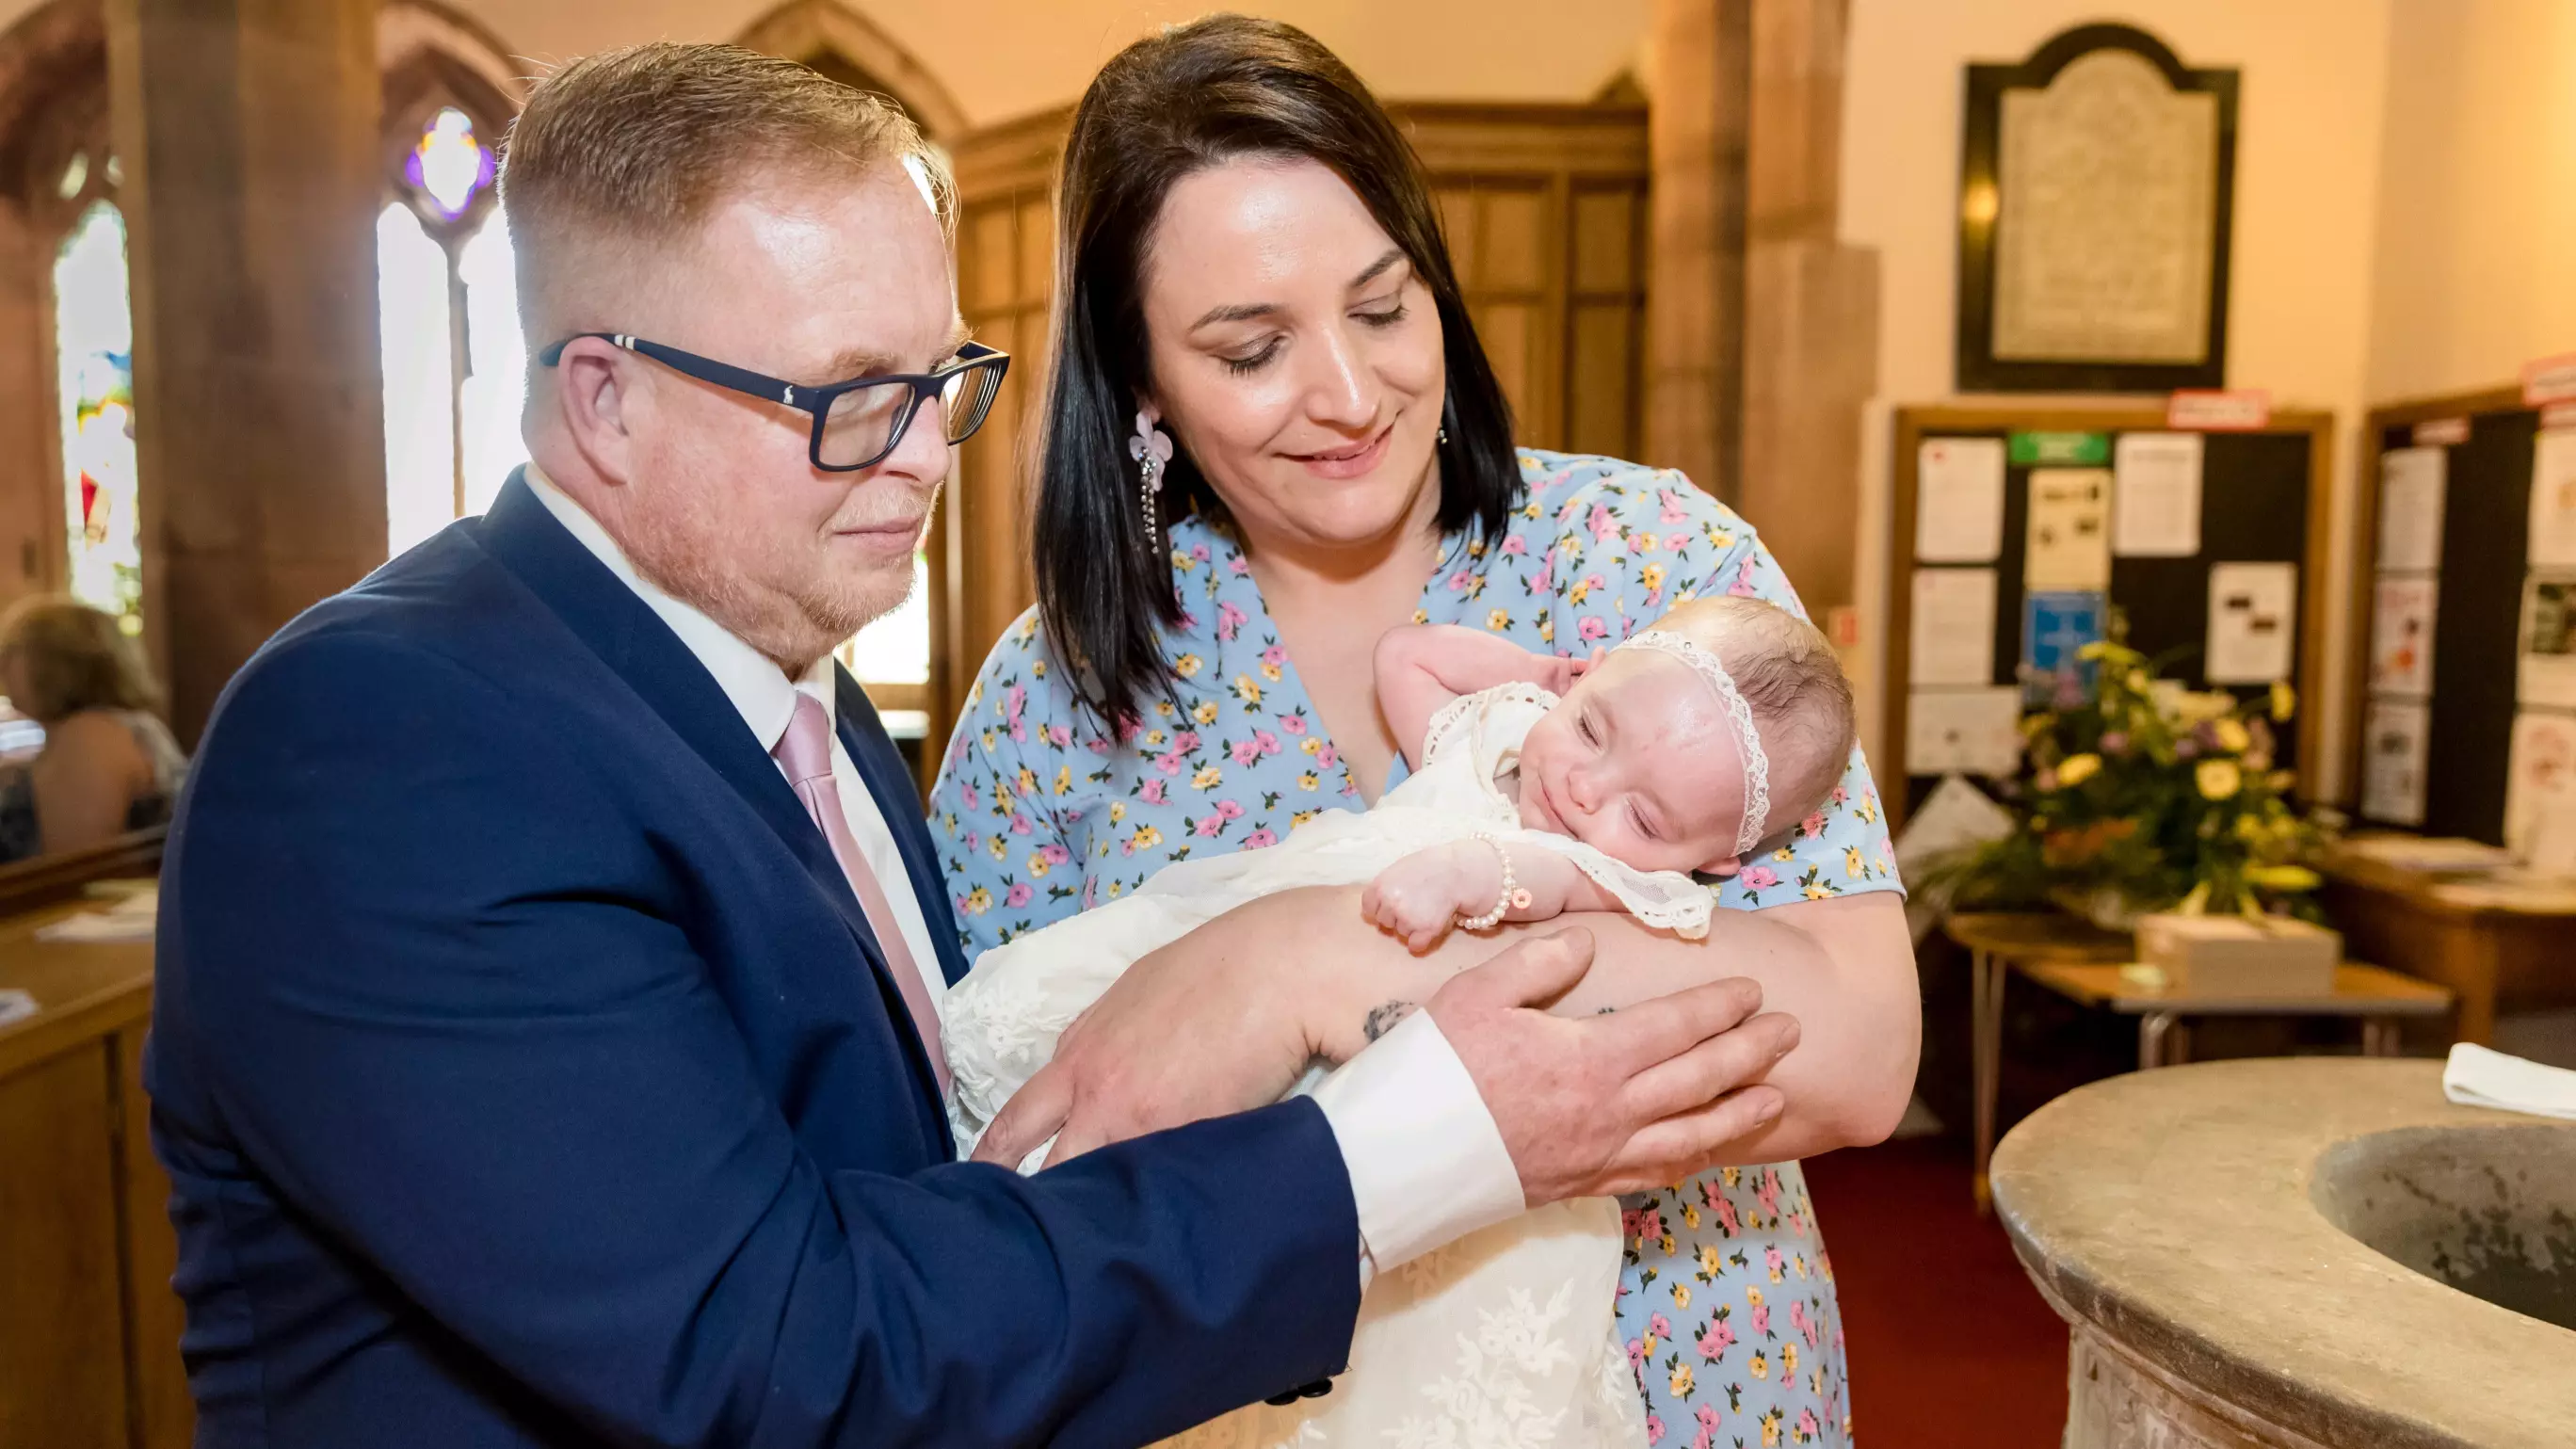 Couple Who Had 13 Miscarriages Finally Have Their 'Miracle' Baby